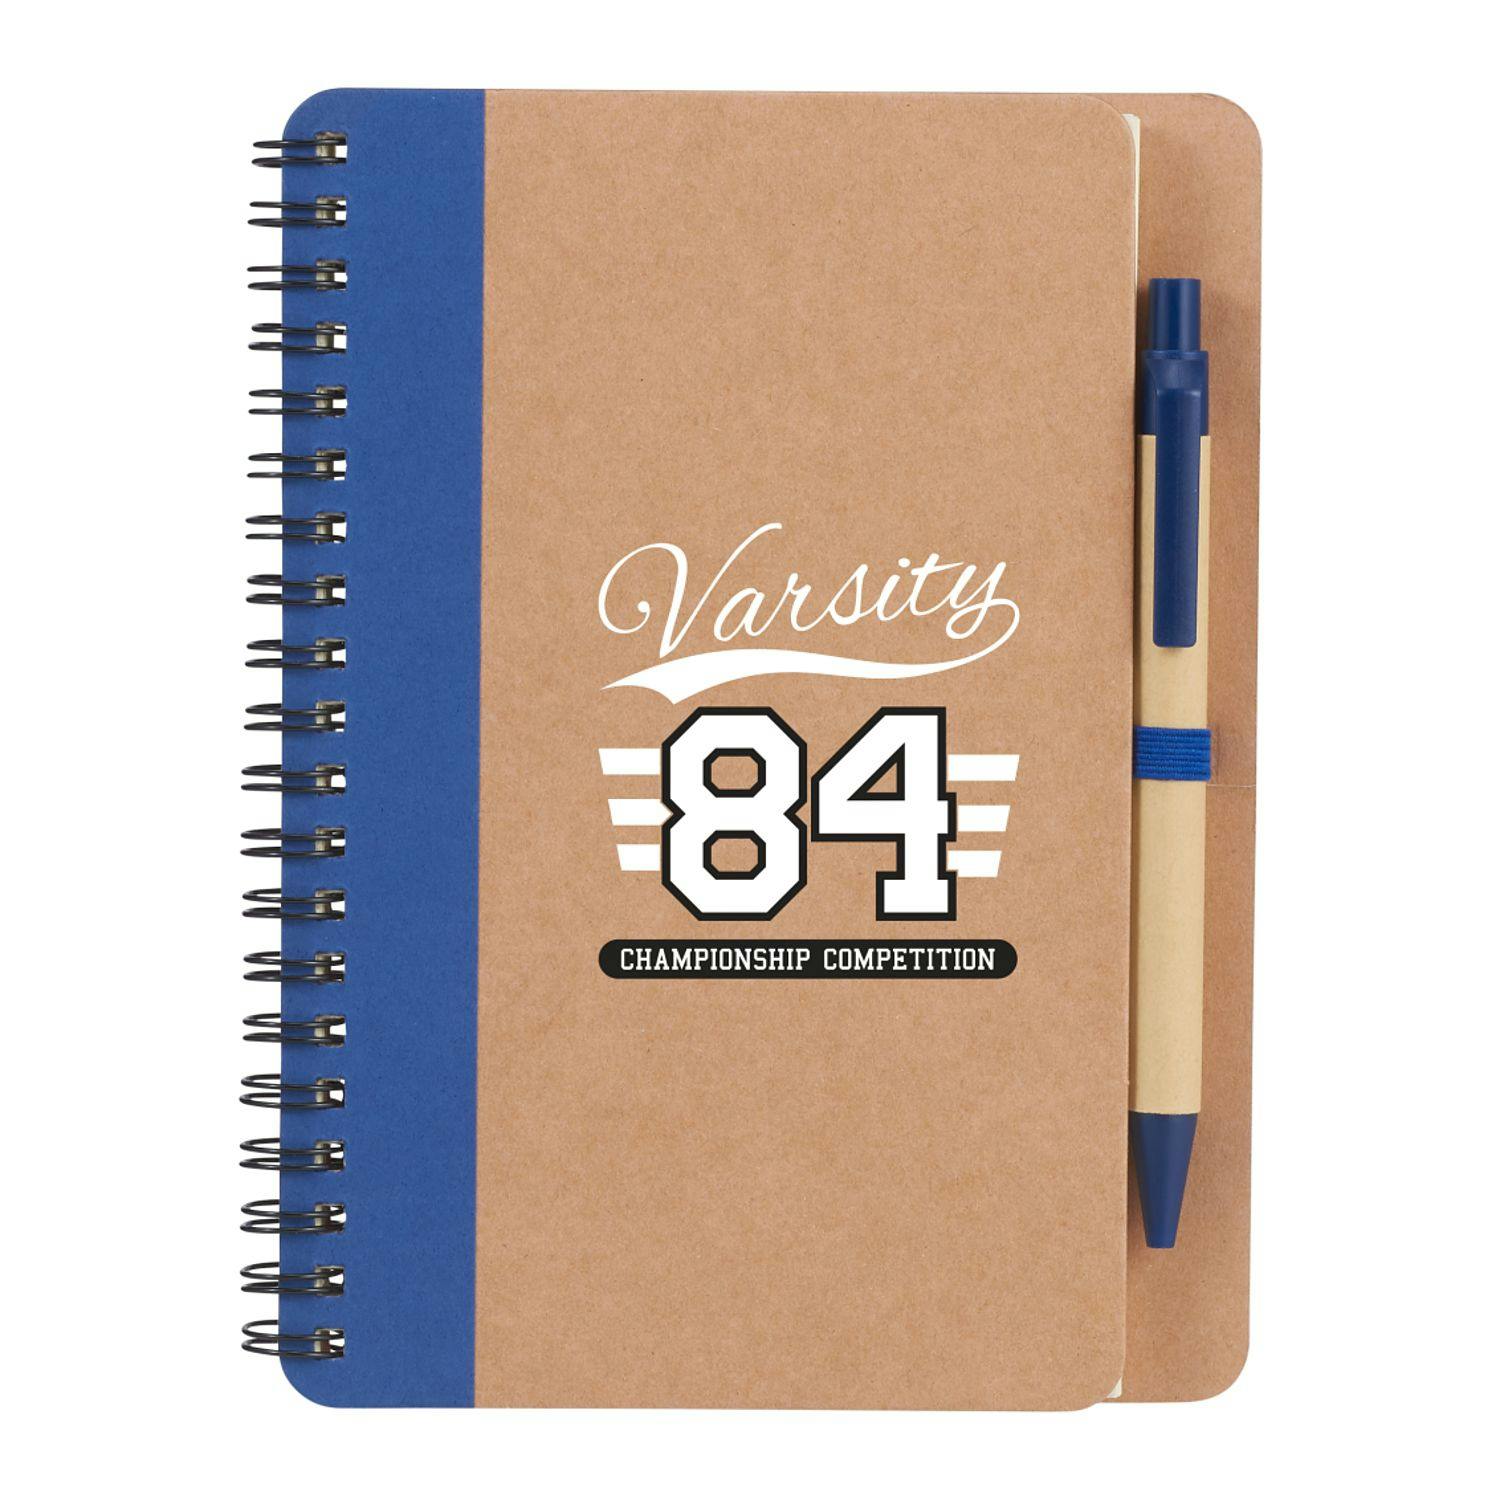 5" x 7" Eco Spiral Notebook with Pen - additional Image 2